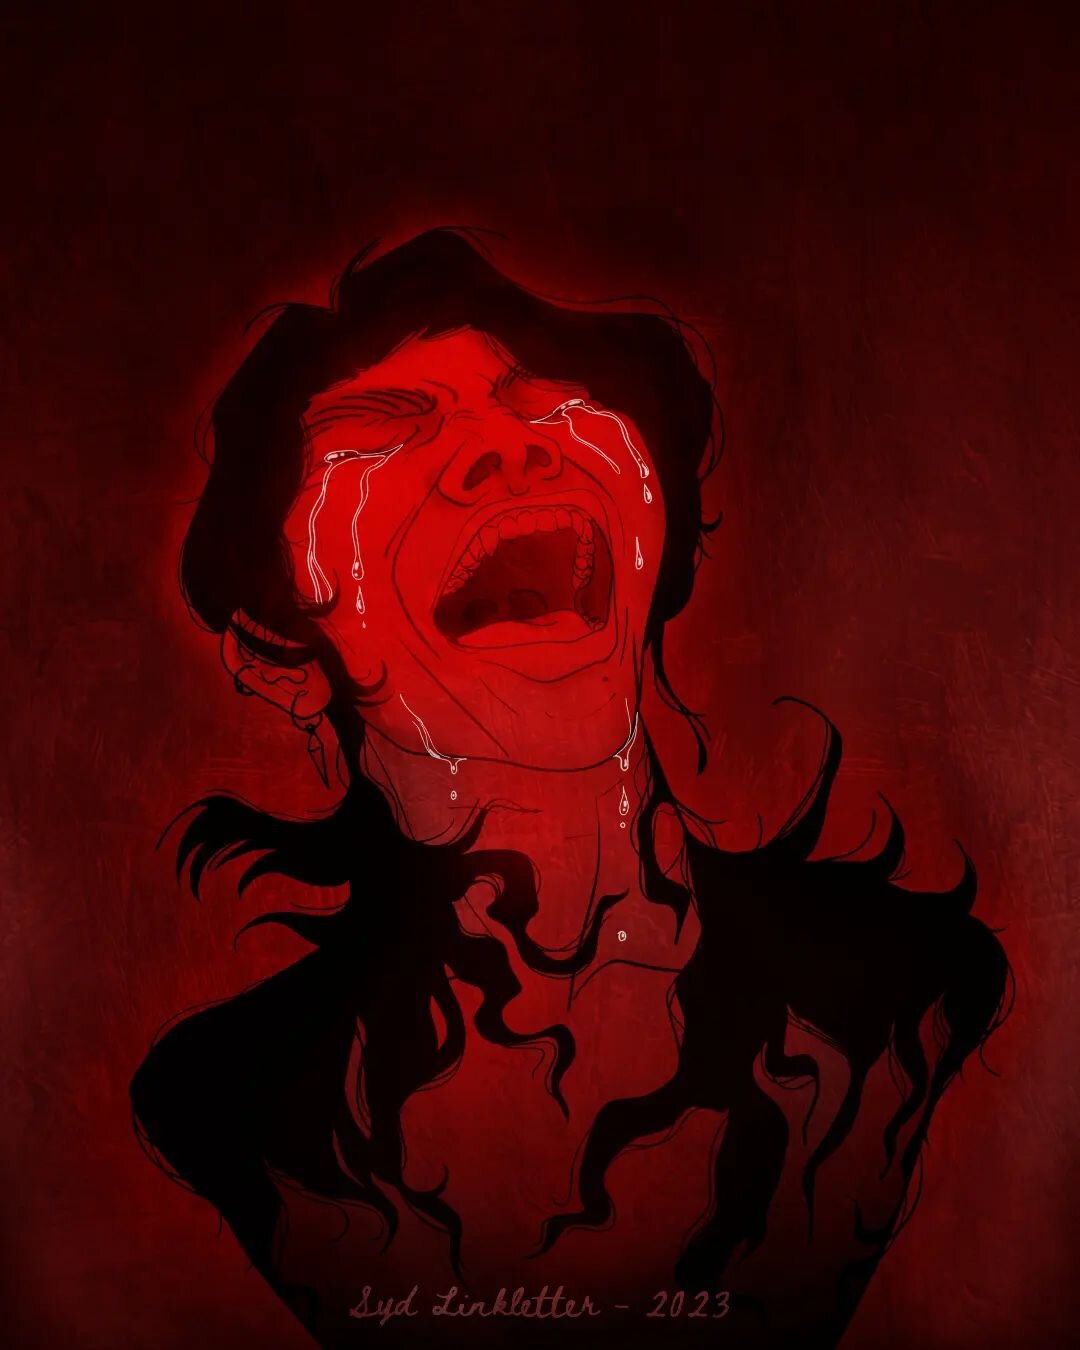 Started unpacking and unearthing any past traumas lately?
.
.
.
.
.
.
#digitalart #scream #monochromeart #red #passion #pain #ptsd #traumahealing #suffering #suffocating #suffocation #smothered